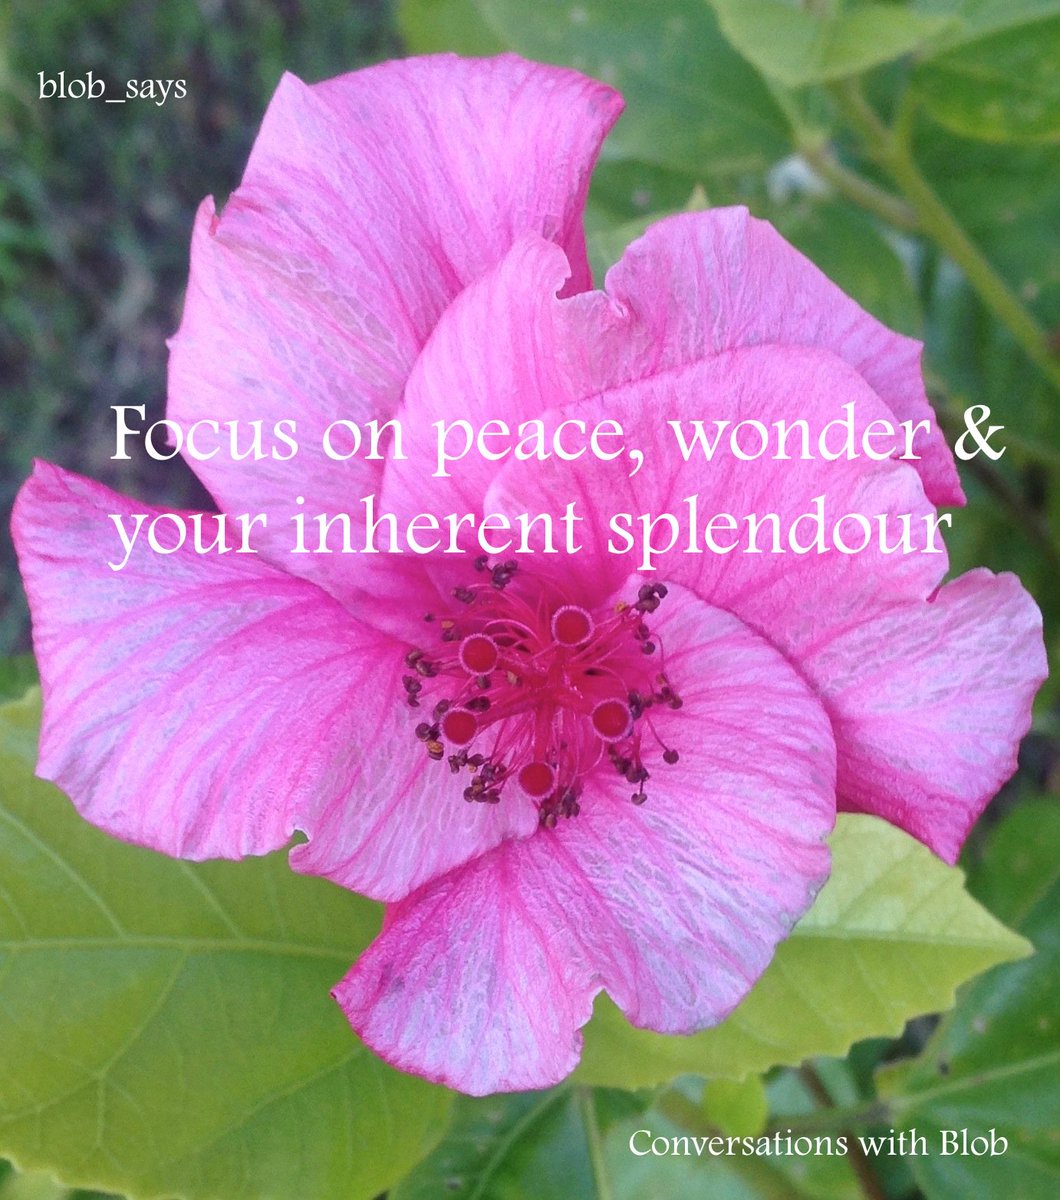 Focus on peace, wonder and your inherent splendour. Don't just read the words. DO IT, for you are GREAT! #peace #love #universalwisdom #spiritualwisdom #meditation #meditationspace #spiritualawakening #youaredivine #youarelove #youareloved #iloveyou #positiveaffirmations